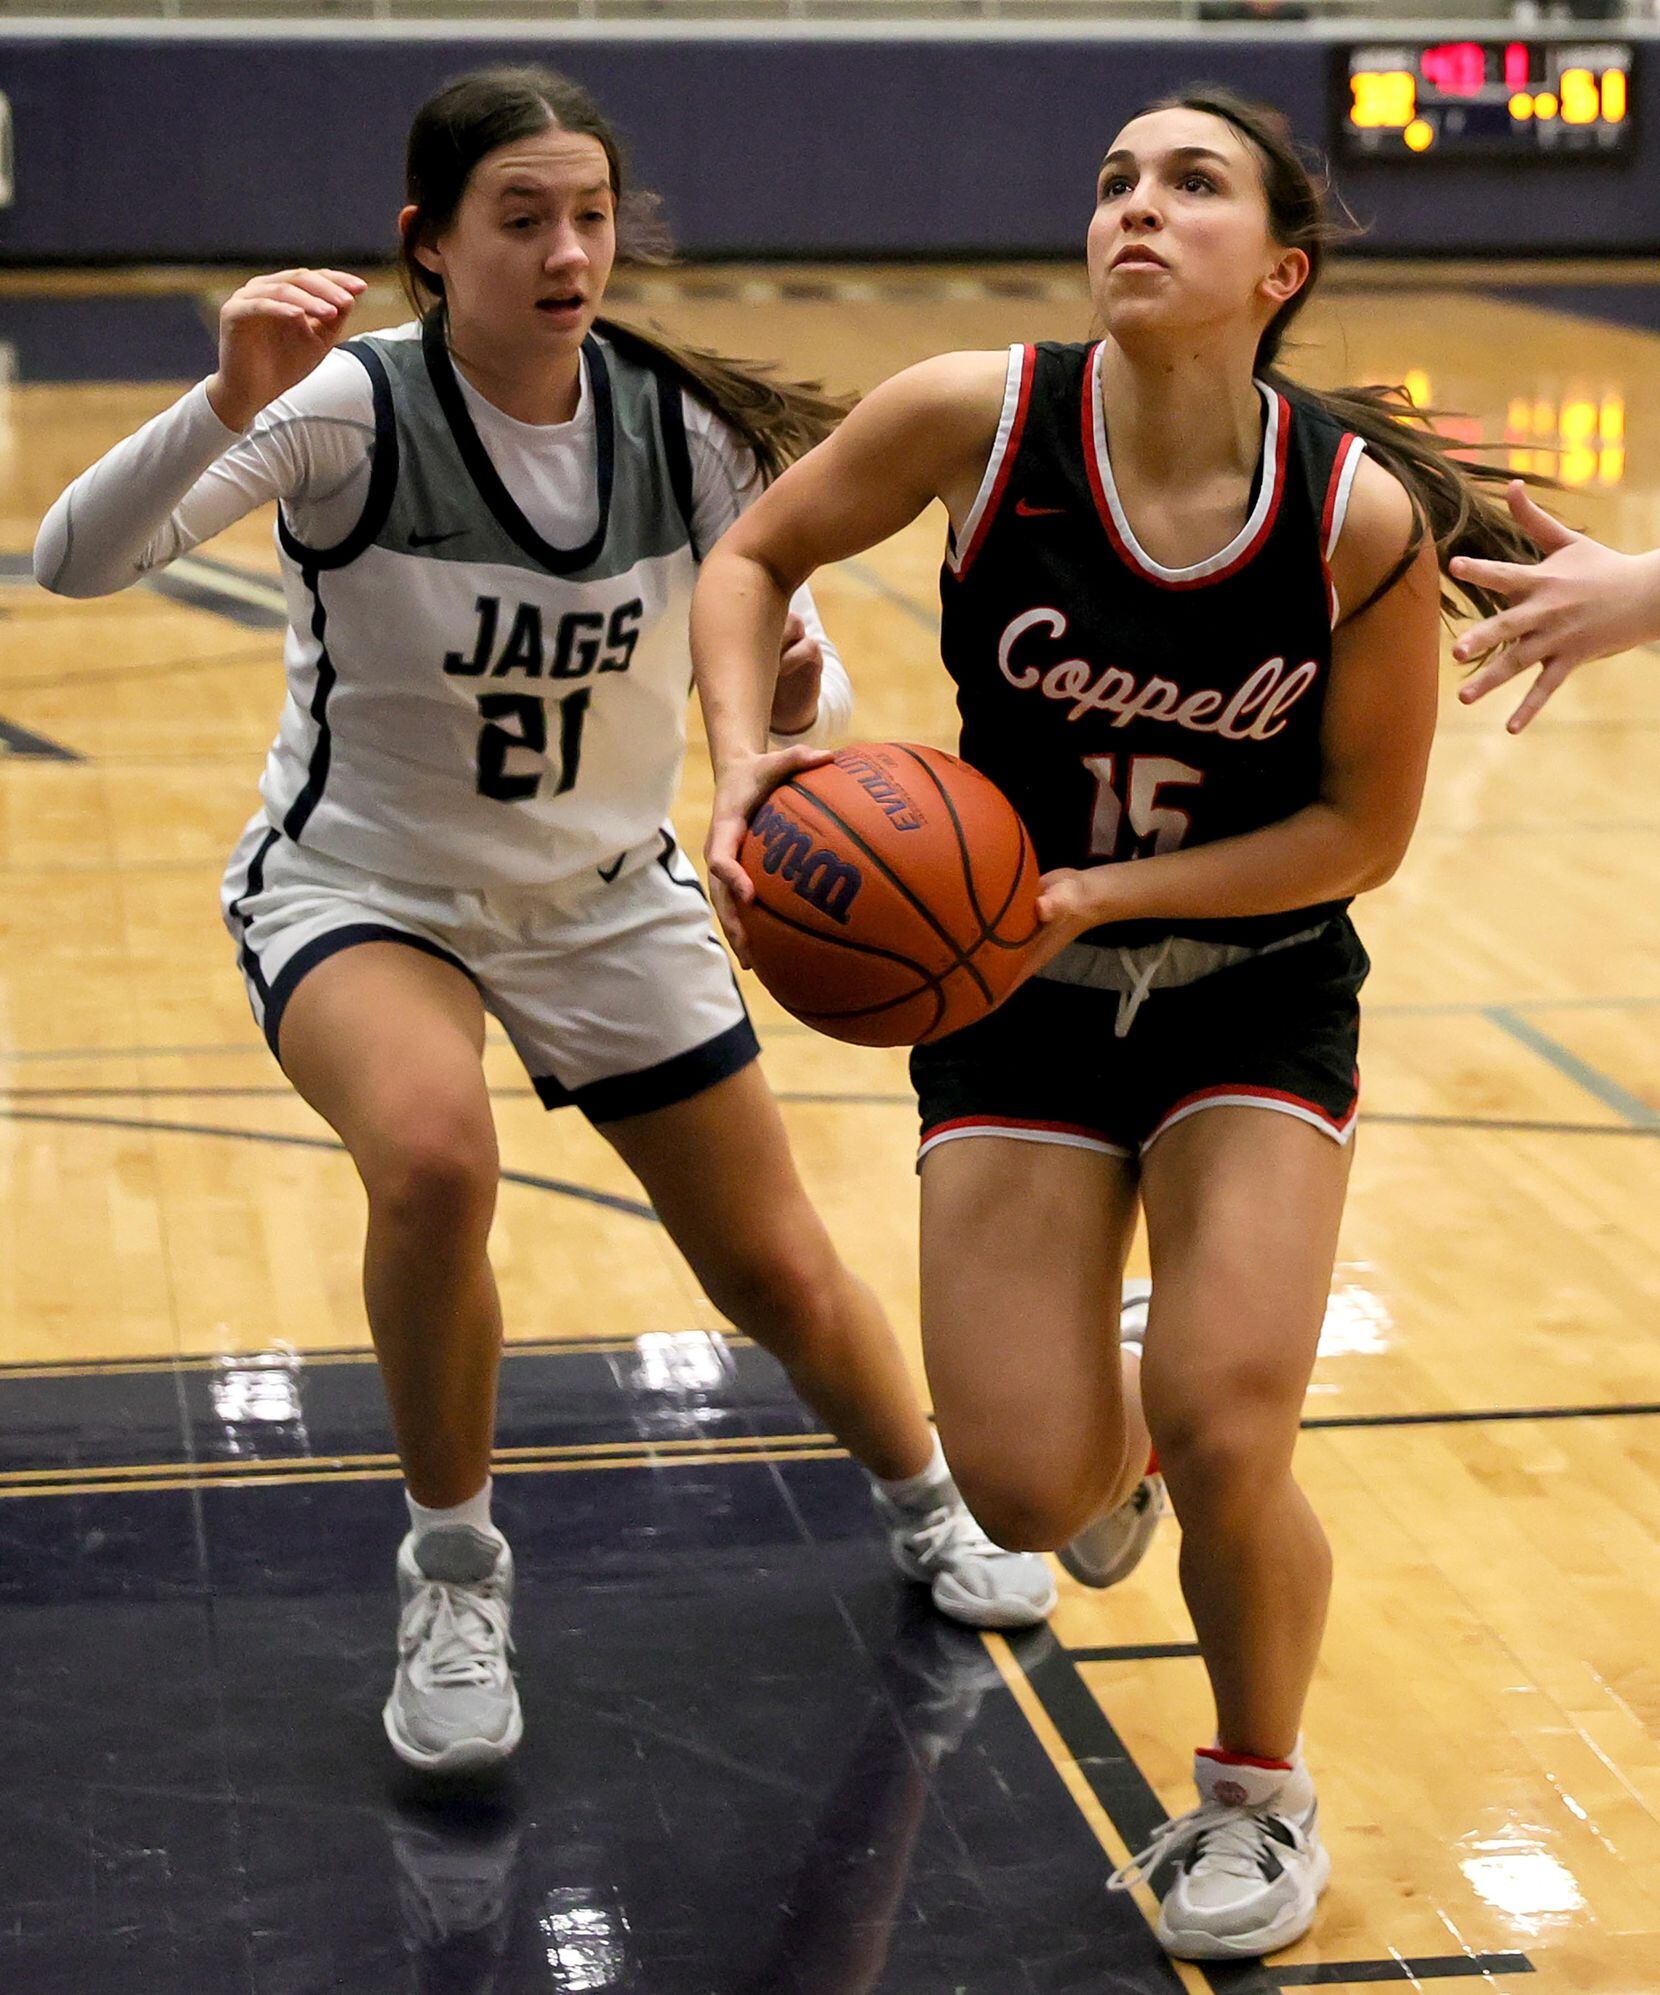 Coppell guard Atia Medenica (15) drives to the basket against Flower Mound guard Kaitlyn...